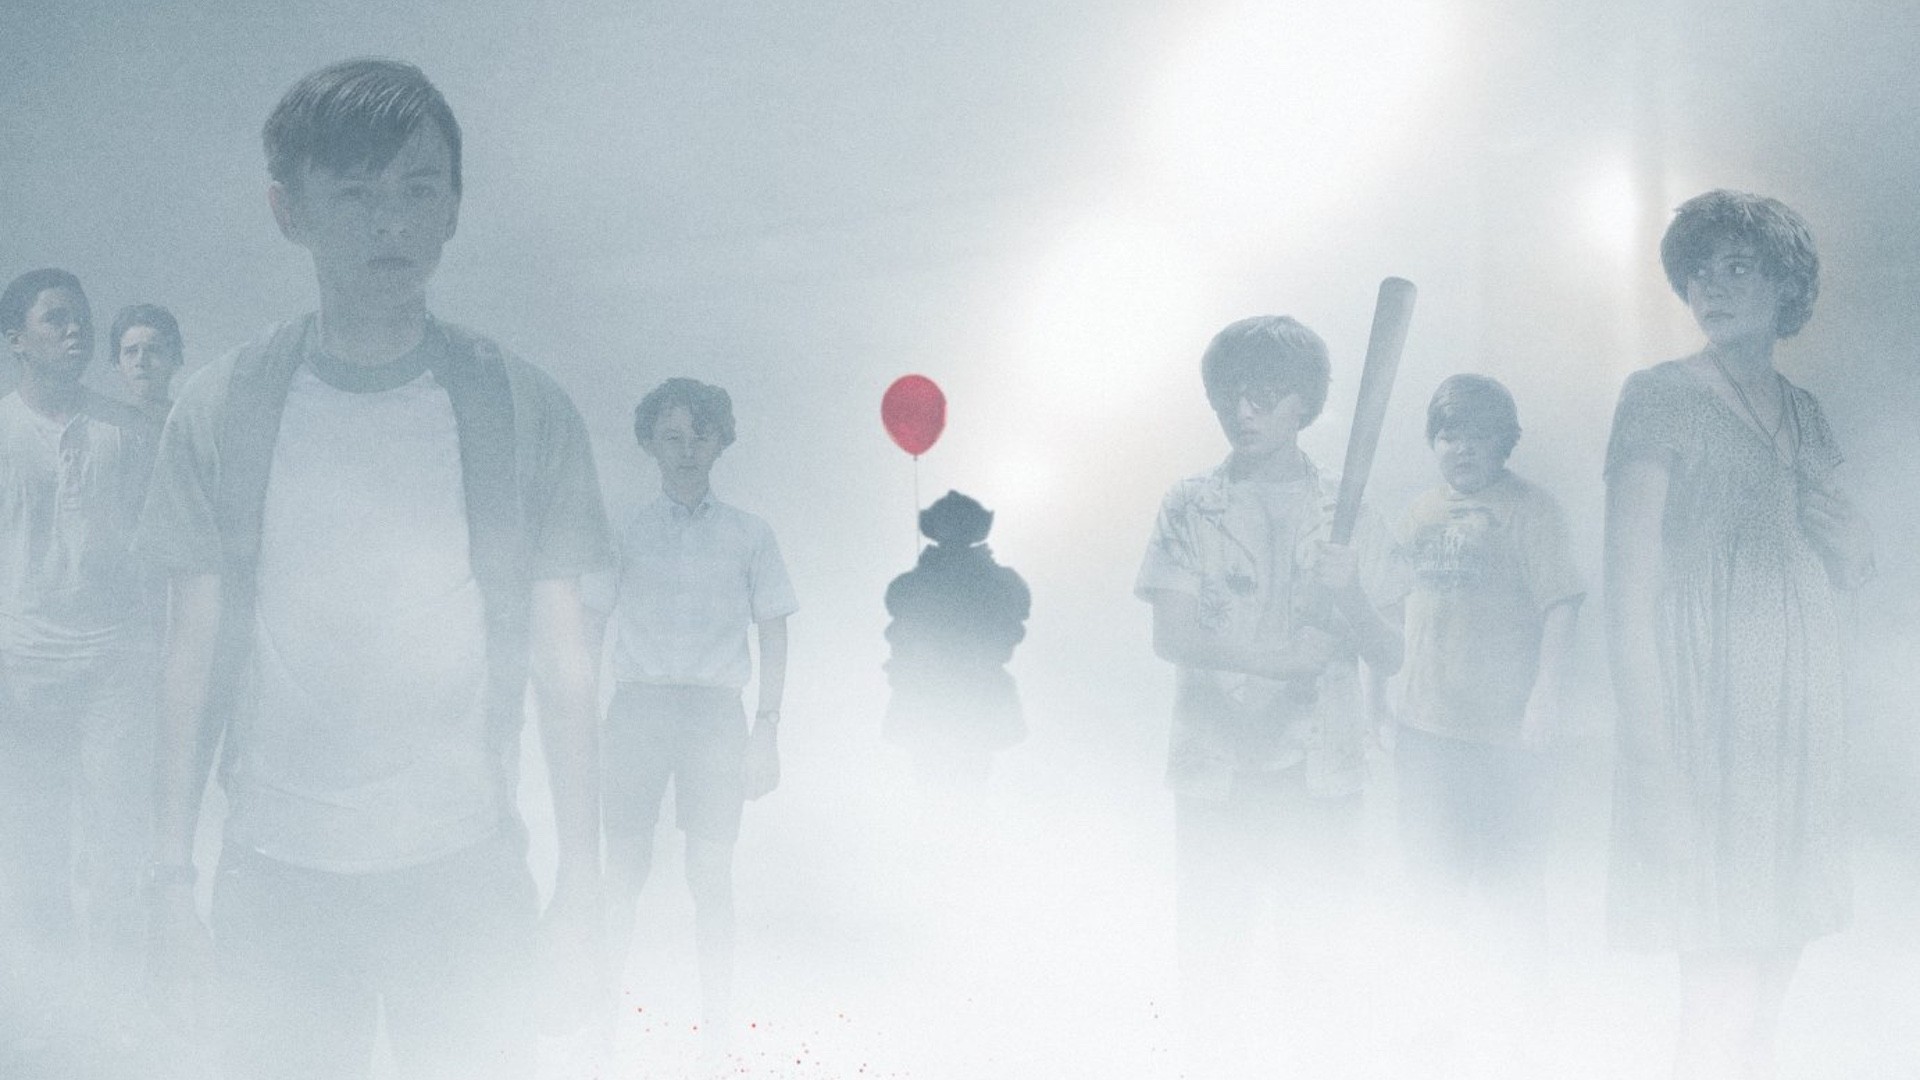 Pennywise The Clown Haunts The Losers Club in New Poster For IT – You